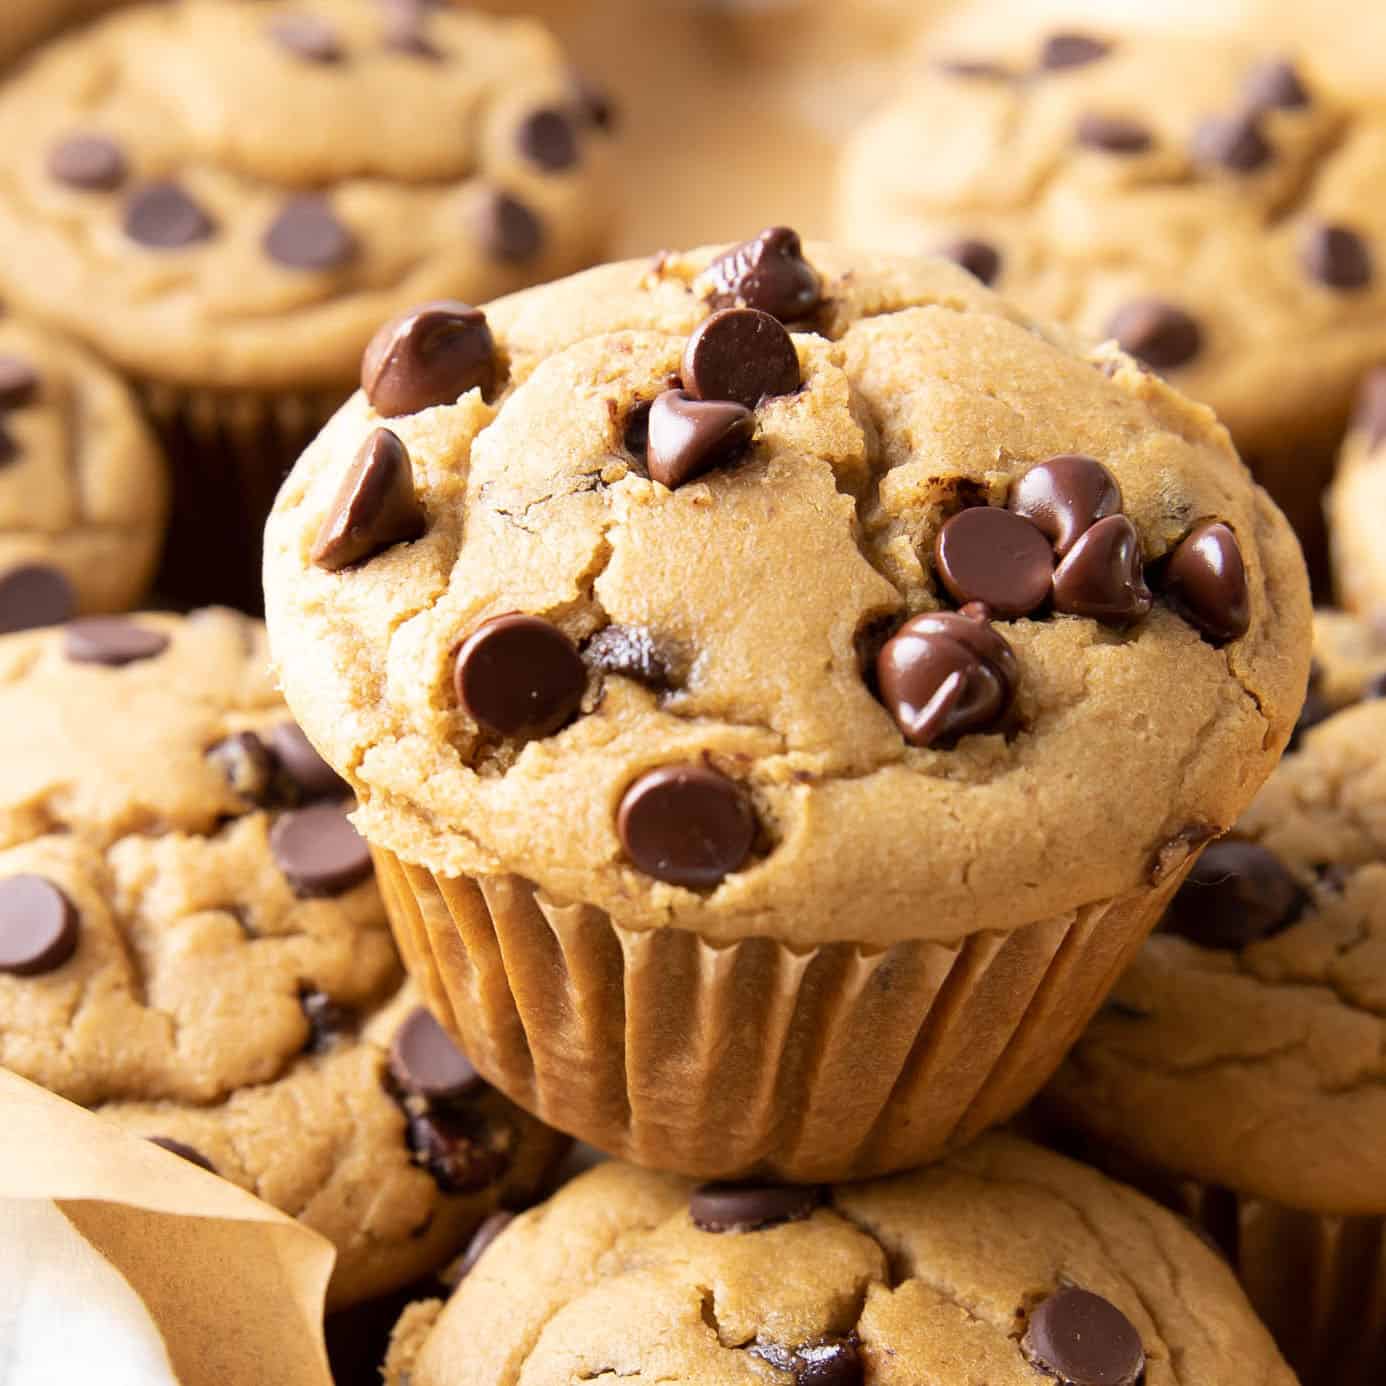 https://beamingbaker.com/wp-content/uploads/2020/10/IGT1-Best-Ever-Healthy-Chocolate-Chip-Muffins-1.jpg